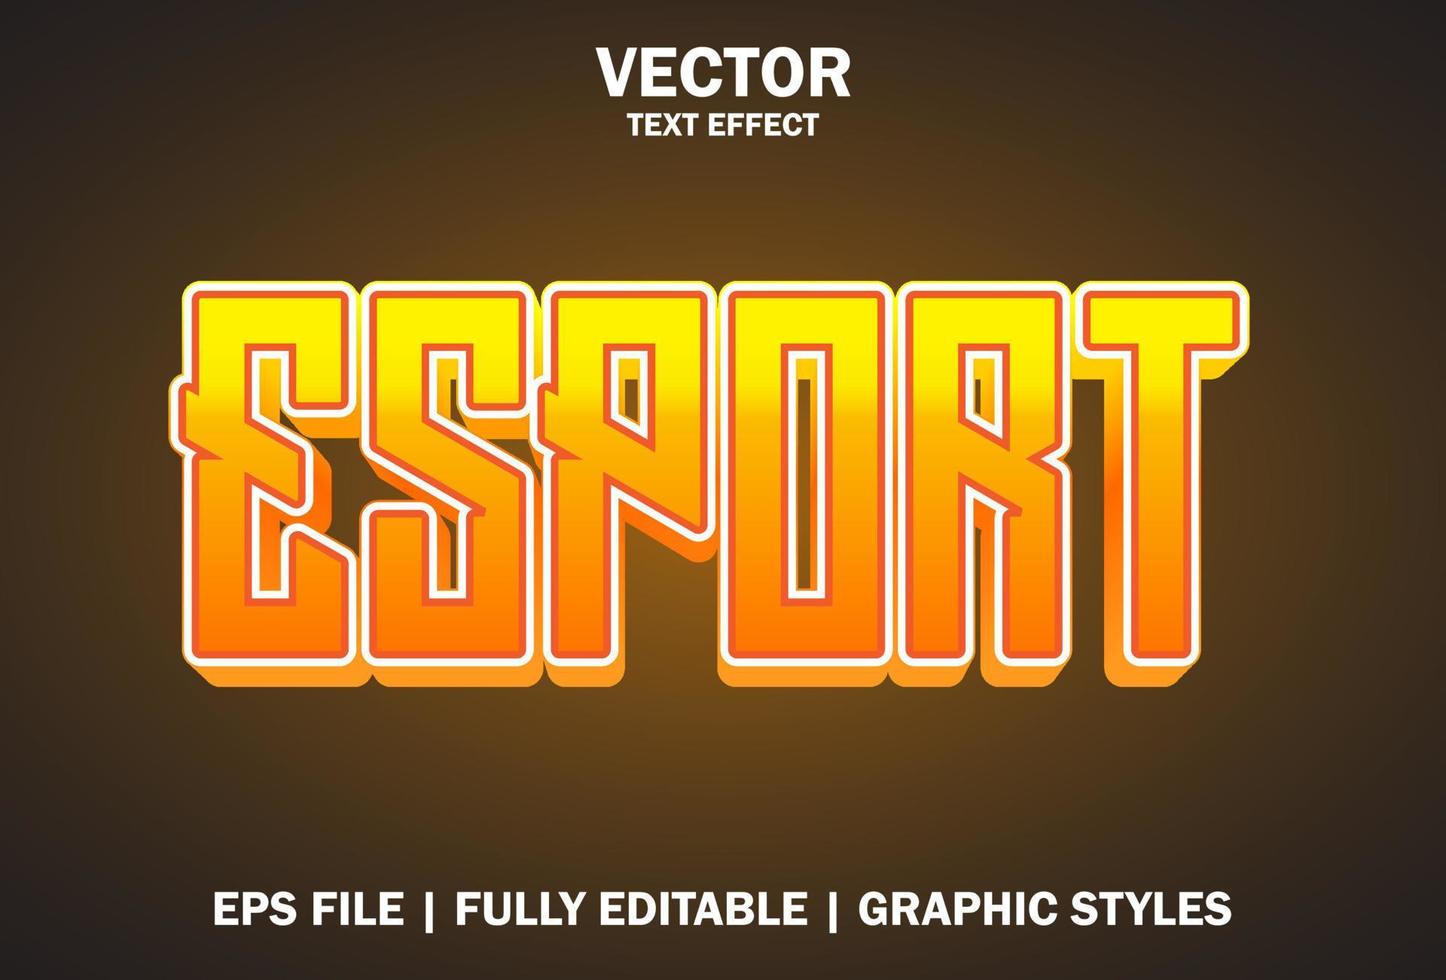 e sport text effect with orange color for brand vector